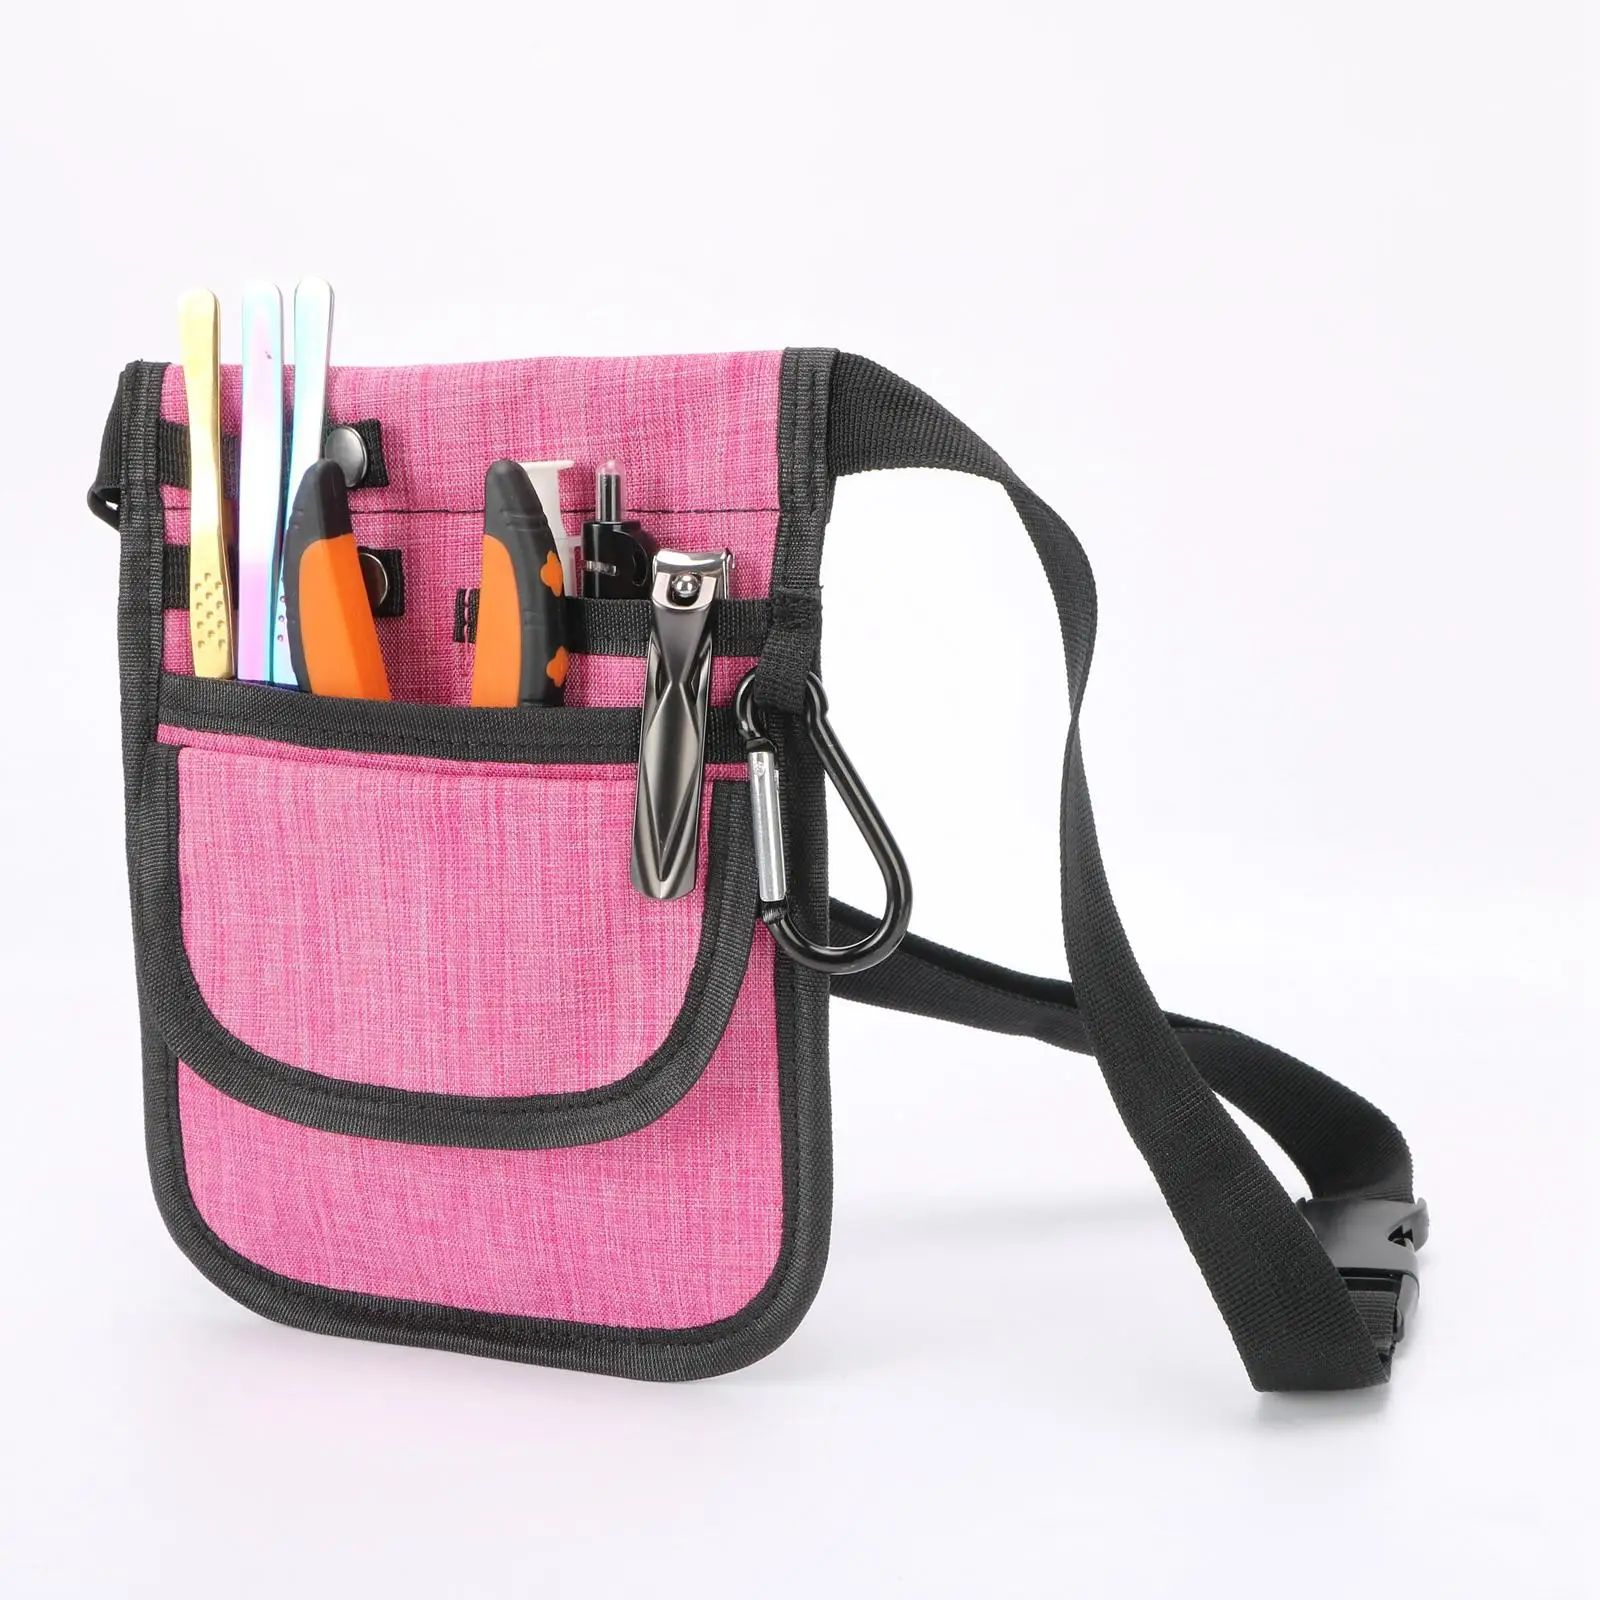  Fanny Pack Tool Organizer Pouch Utility Hip Bag for Bandage